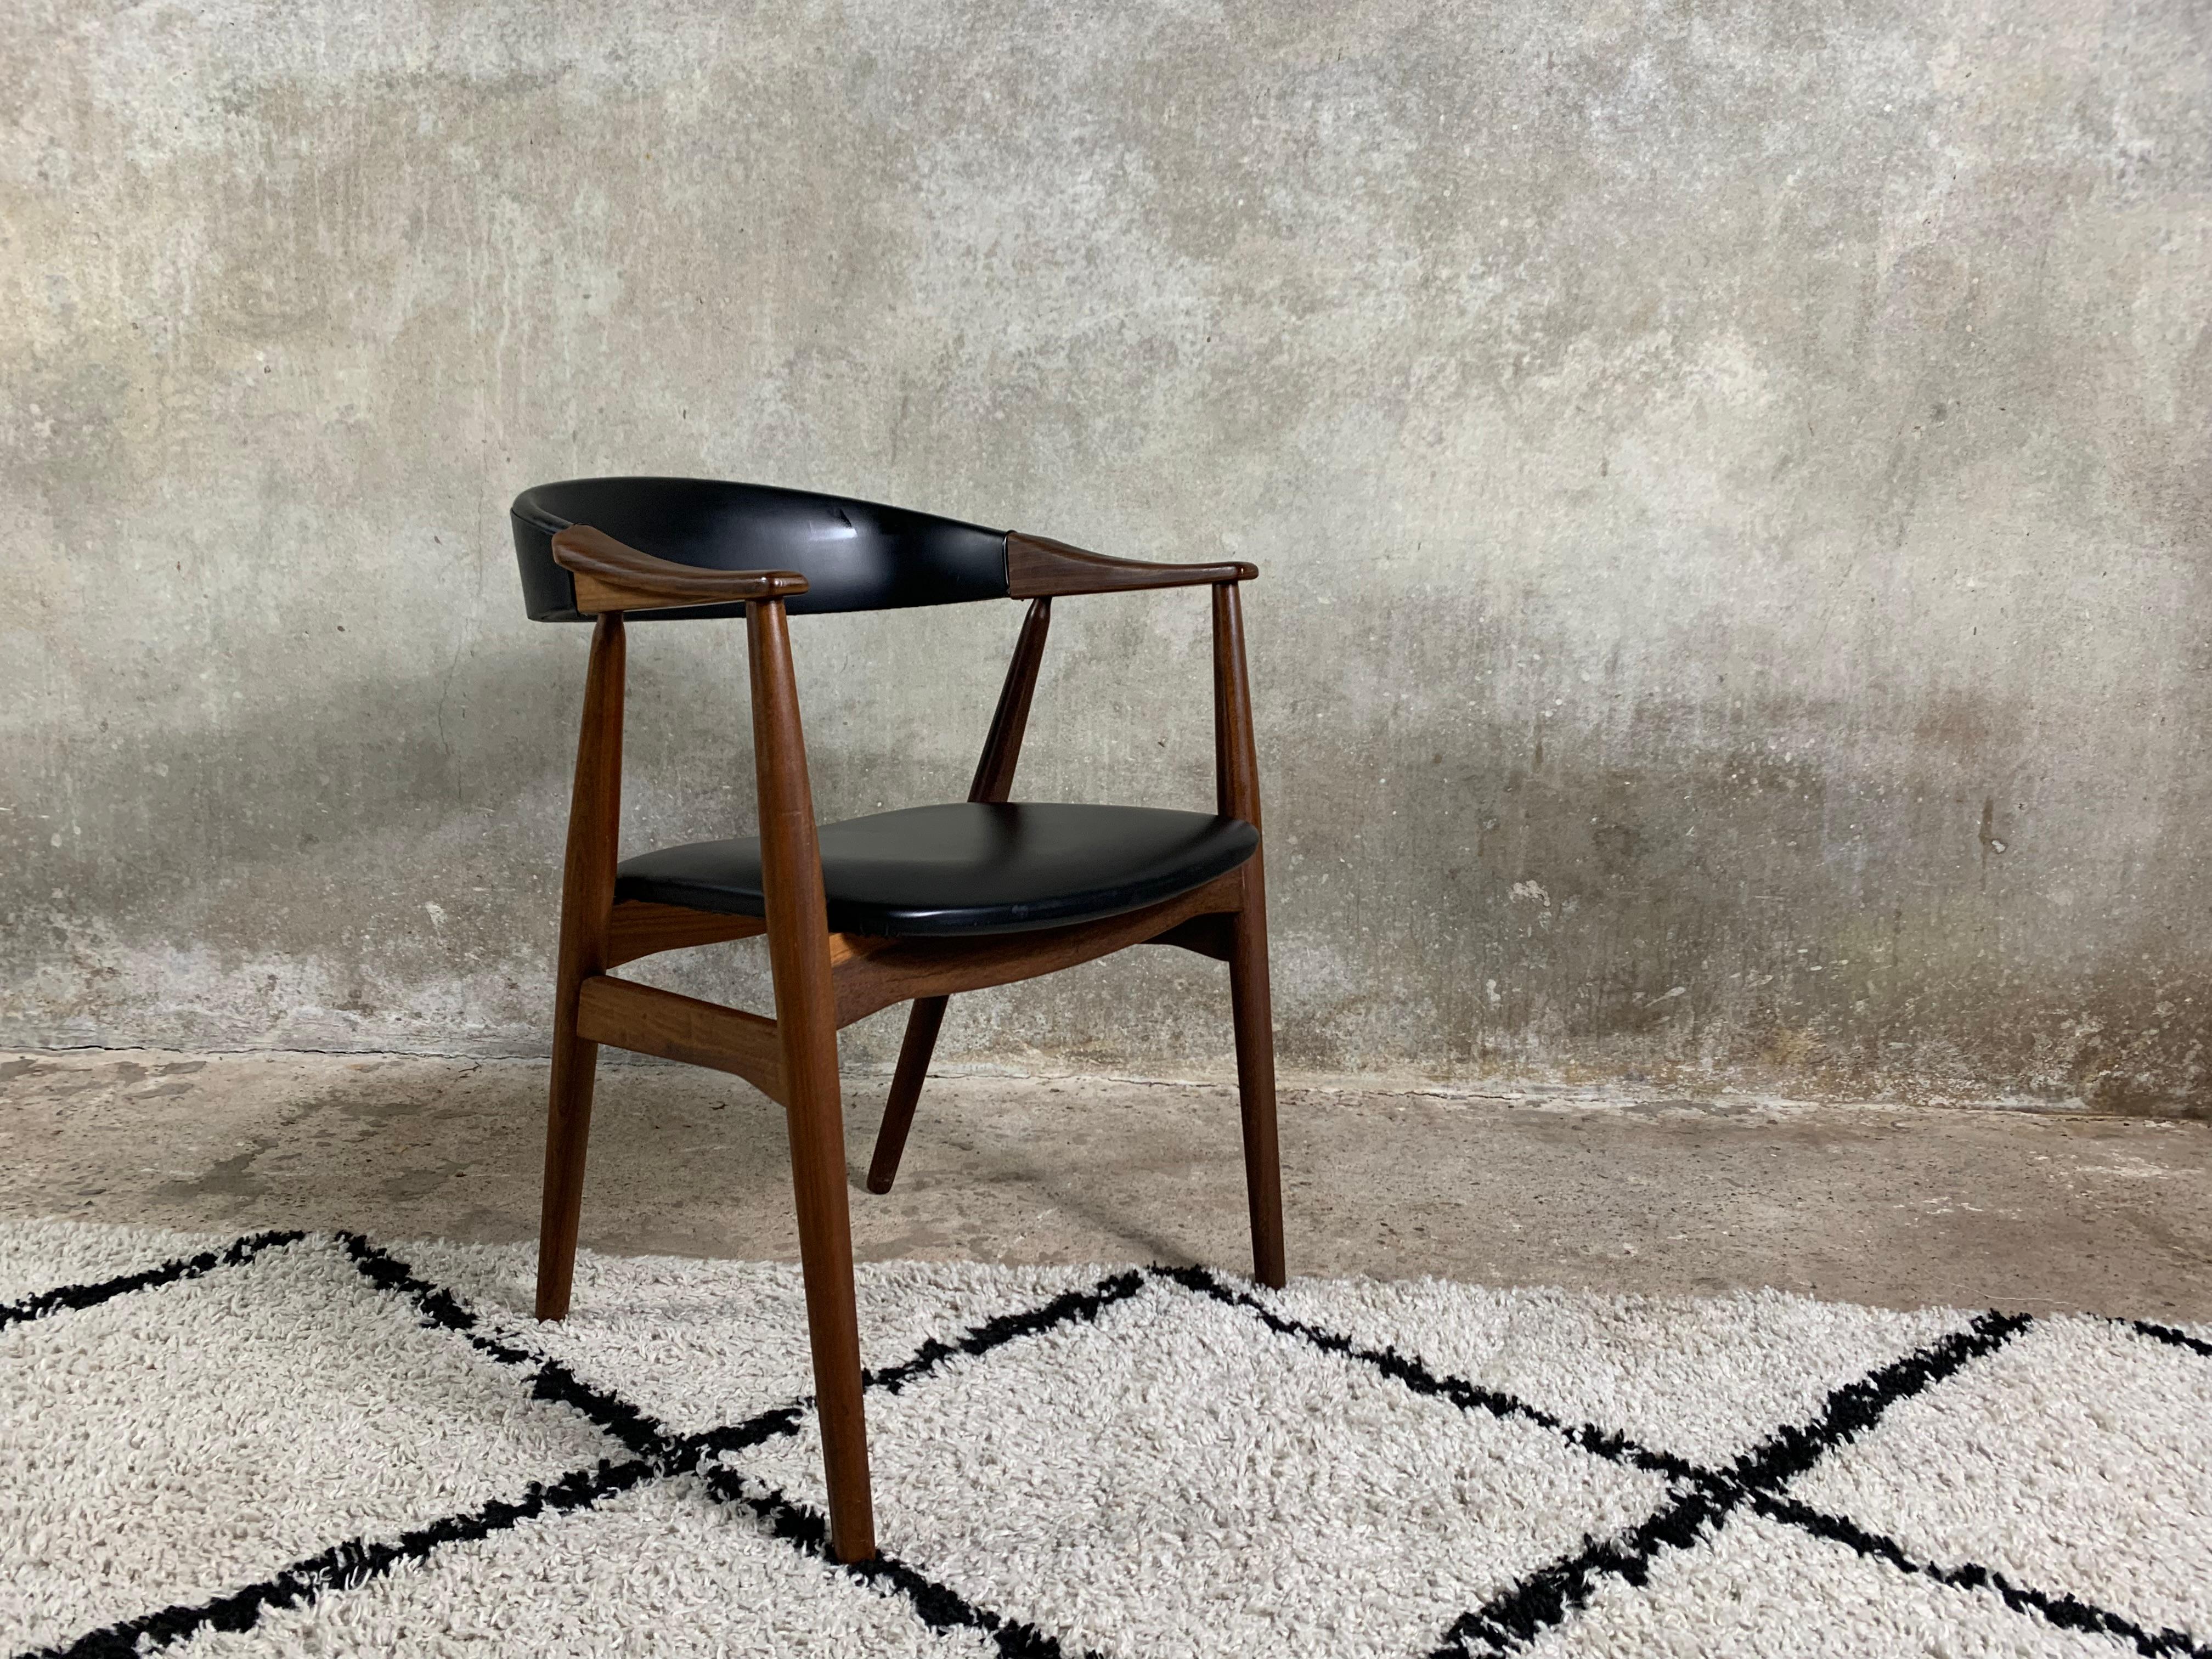 Armchair model 213 in teak and imitation leather/skai designed by Th Harlev for Farstrup Møbler in 1958. The chair is in very good original condition. A beautiful example of Scandinavian minimalism at its best.